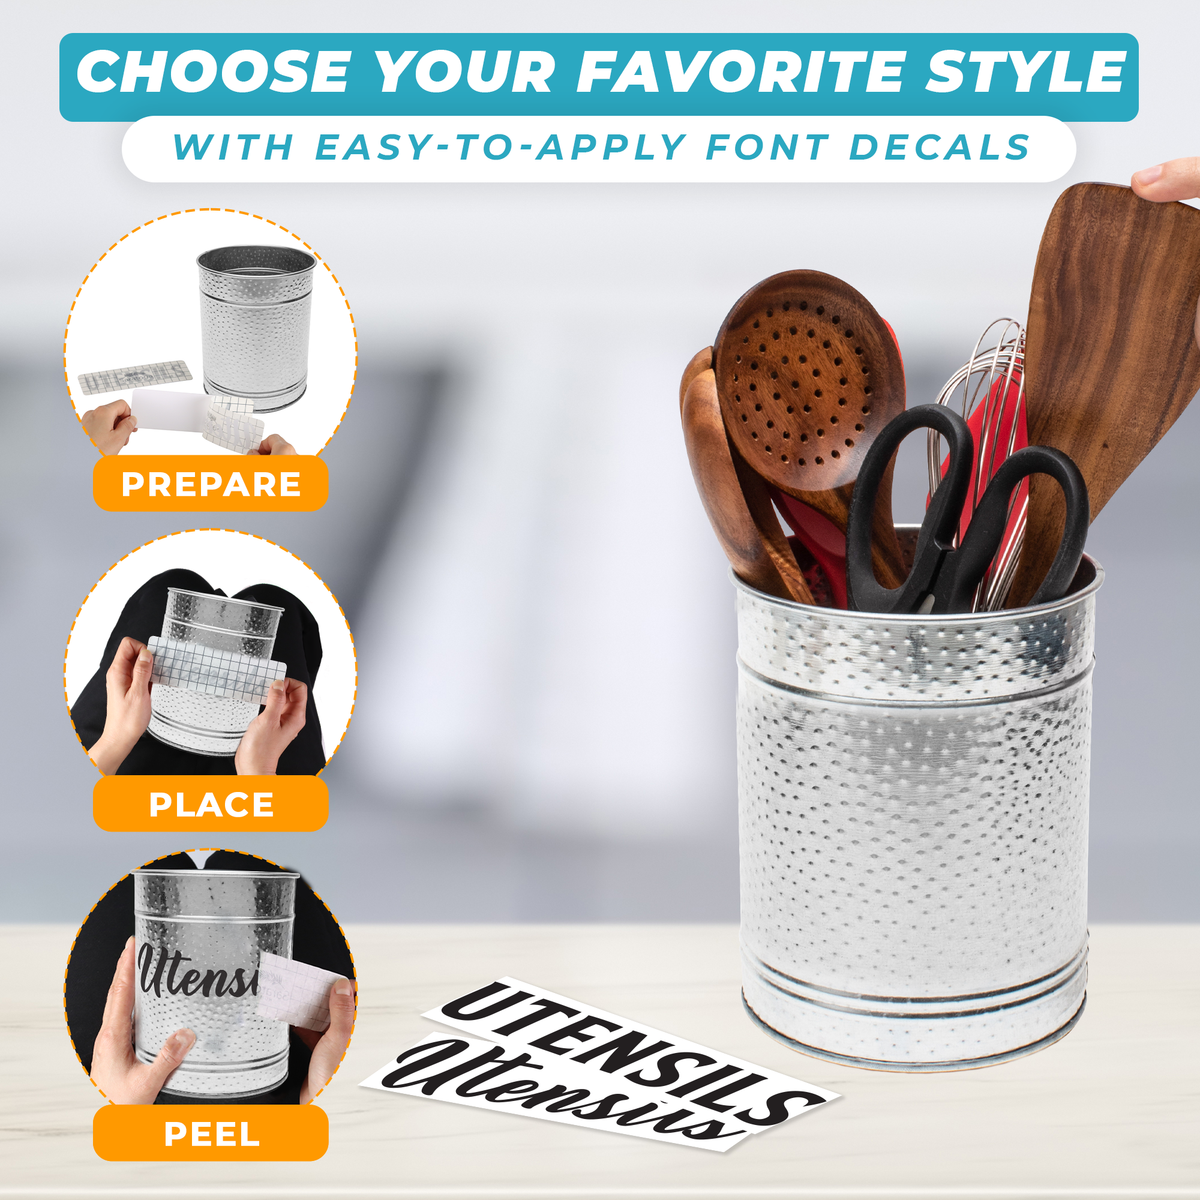 Steps to easily apply font decals on your utensil holder